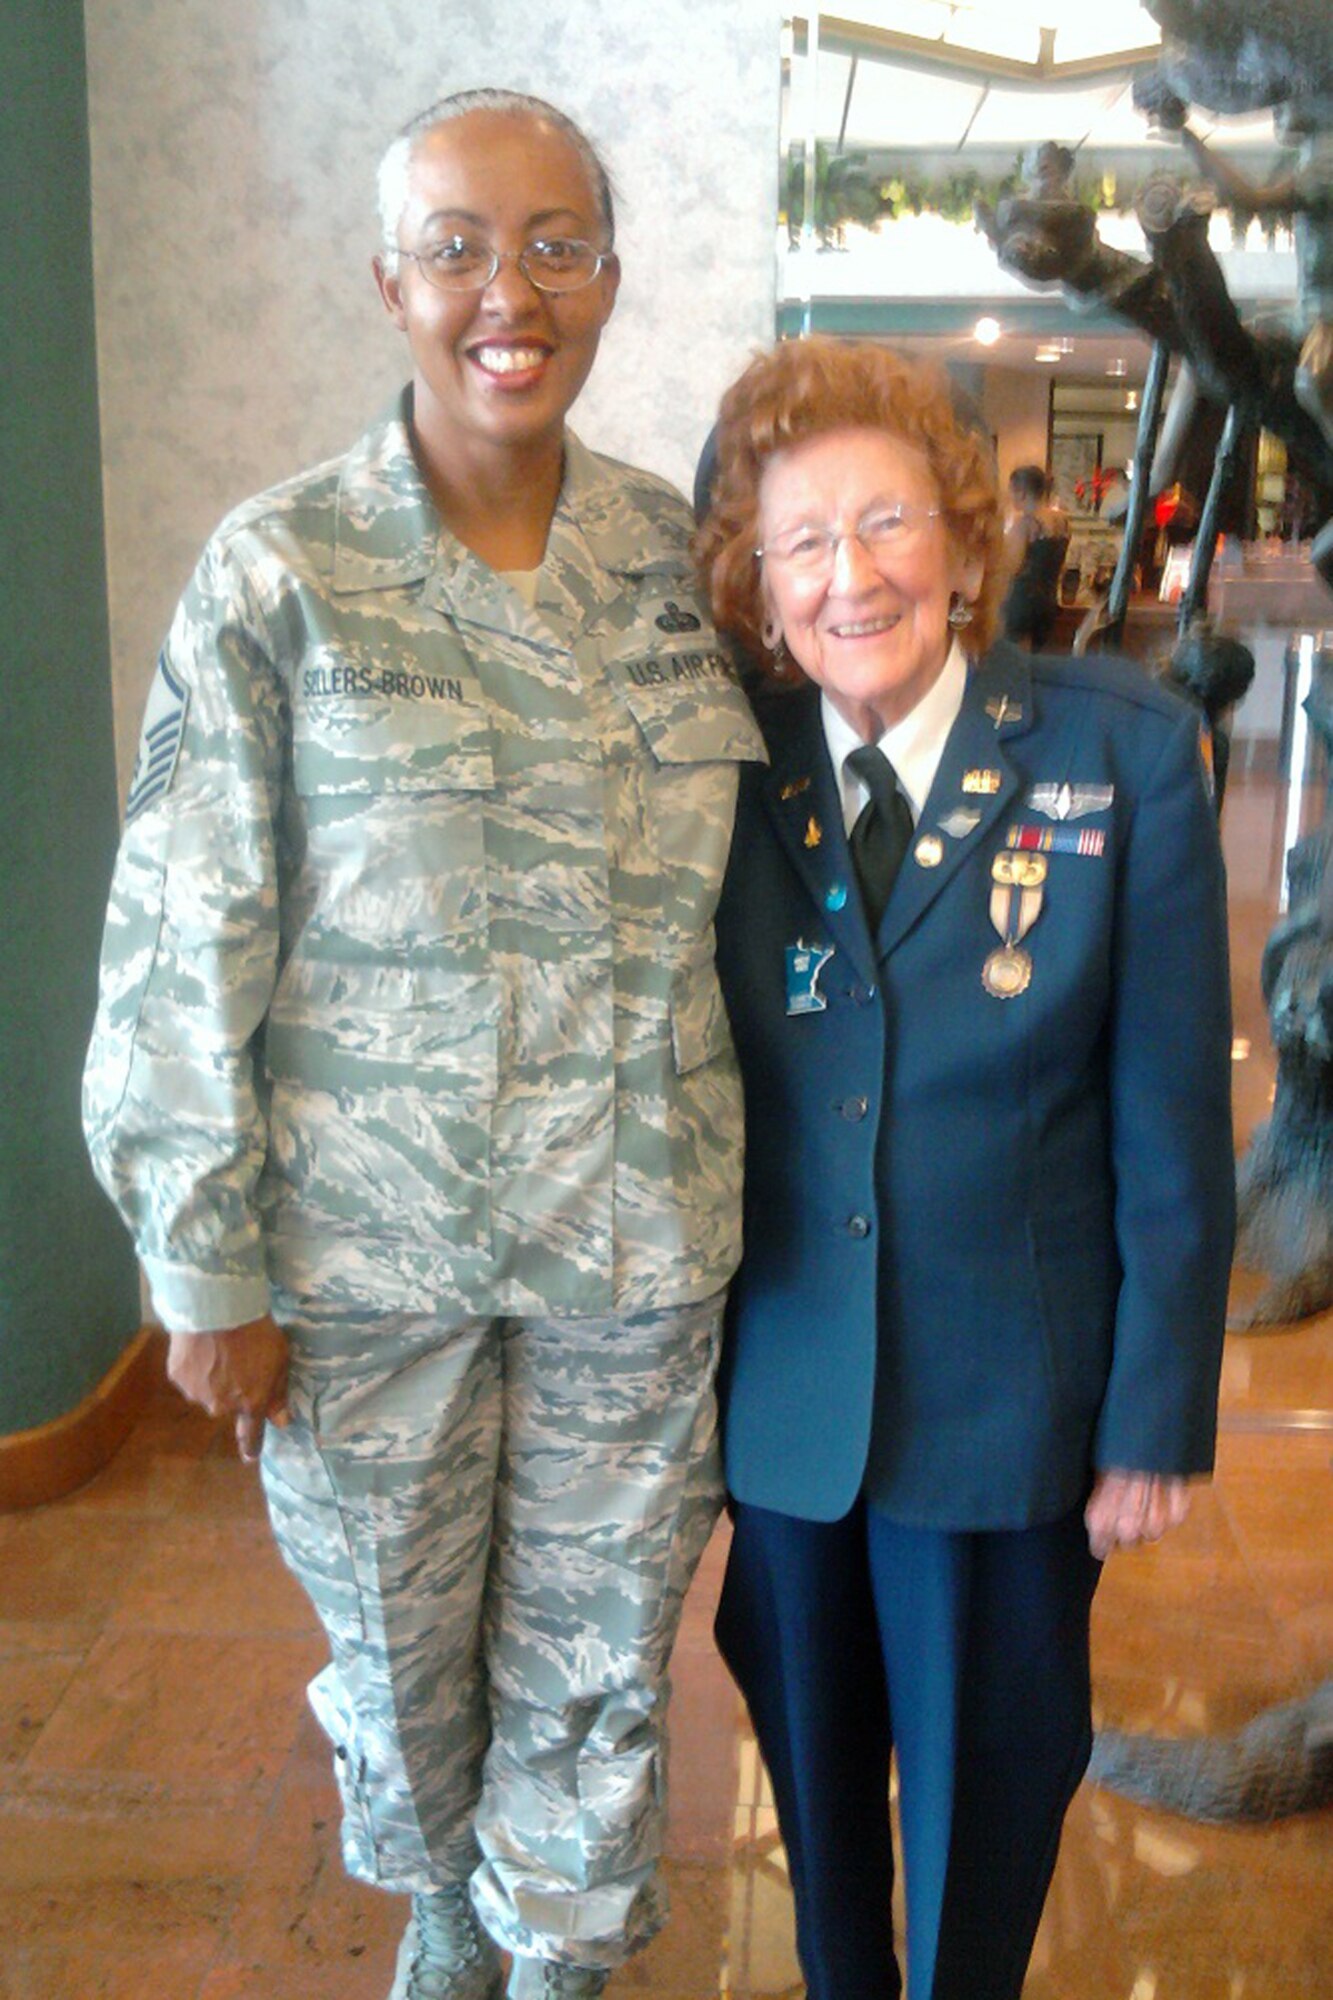 Master Sgt. Bianca Sellers-Brown, who is the noncommissioned officer in charge of the commander’s support staff for the 307th Mission Support Group, and Mrs. Elizabeth Strohfus, pose for a photo at the 2011 Commemorative Air Force Air Show in Odessa, Texas, Oct. 7, 2011. In August 1943, Strohfus, who is now 91 years old, was selected to participate in a women’s flight program freeing men pilots to report for military duty overseas. These women were officially designated as WASPs, Women Airforce Service Pilots. Sellers-Brown was selected as a military escort for Mrs. Strohfus for the air show. (Courtesy photo)